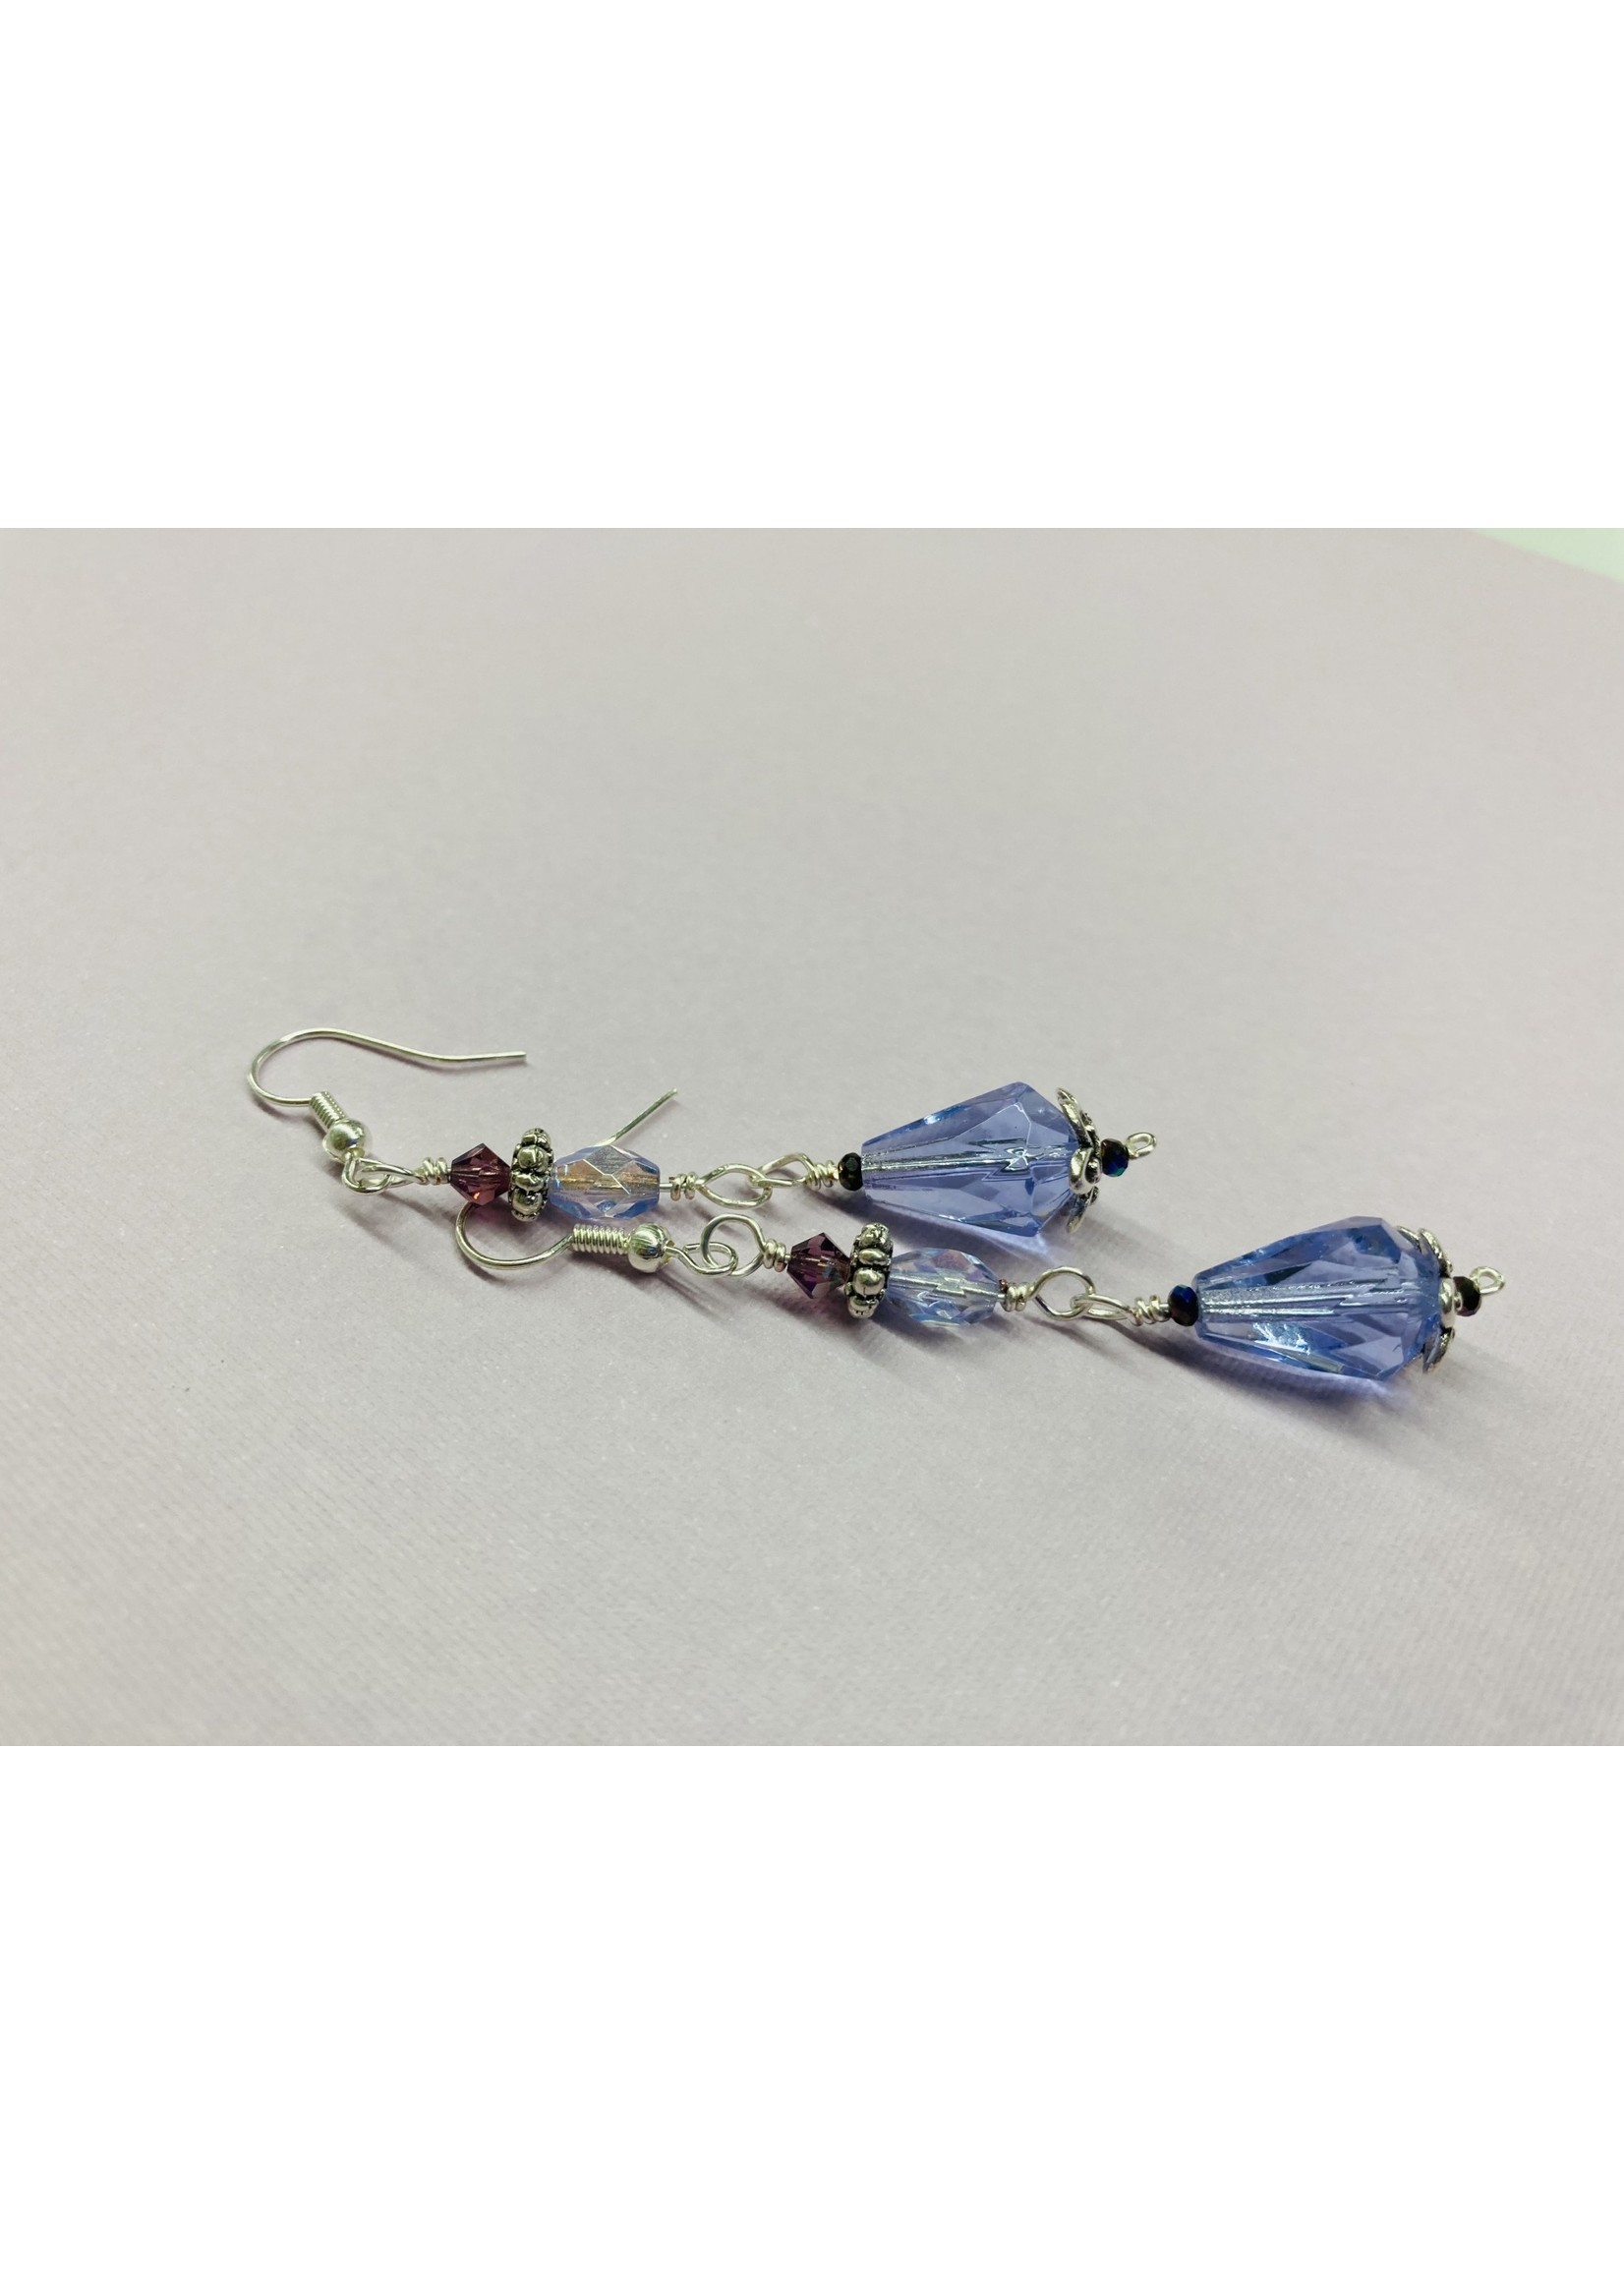 Our Twisted Dahlia E012 Lavender Tear Drop Crystals with Silver Findings and Purple Crystal Earrings